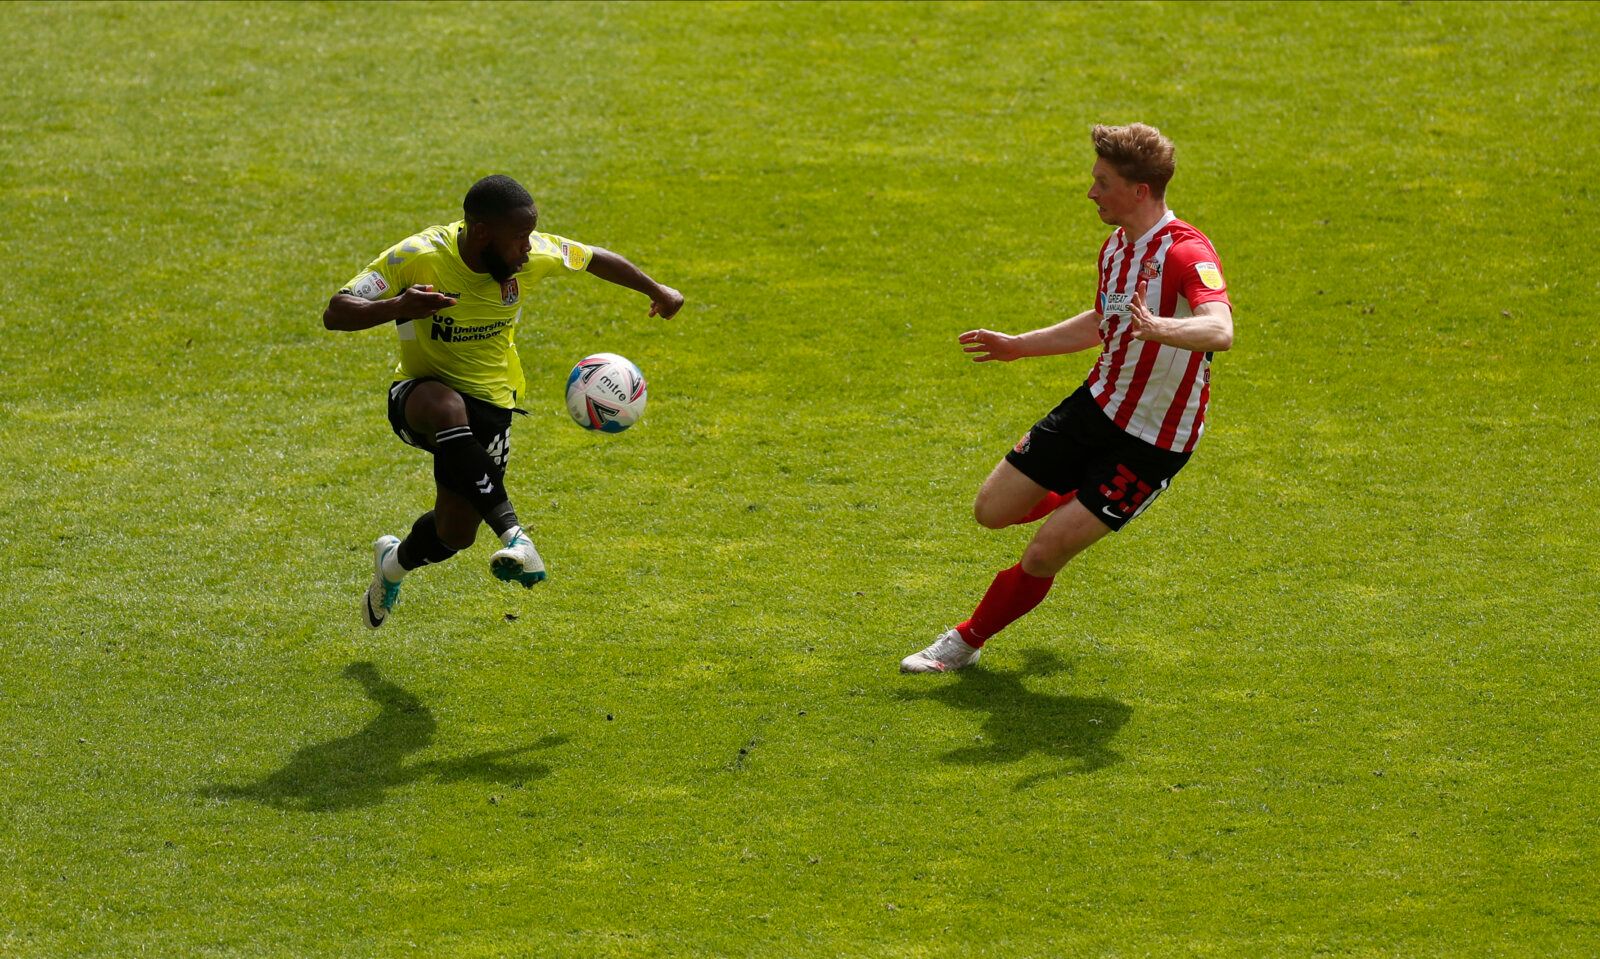 Soccer Football - League One - Sunderland v Northampton Town - Stadium of Light, Sunderland, Britain - May 9, 2021 Sunderland's Denver Hume in action with Northampton's Mark Marshall Action Images/Lee Smith EDITORIAL USE ONLY. No use with unauthorized audio, video, data, fixture lists, club/league logos or 'live' services. Online in-match use limited to 75 images, no video emulation. No use in betting, games or single club /league/player publications.  Please contact your account representative 